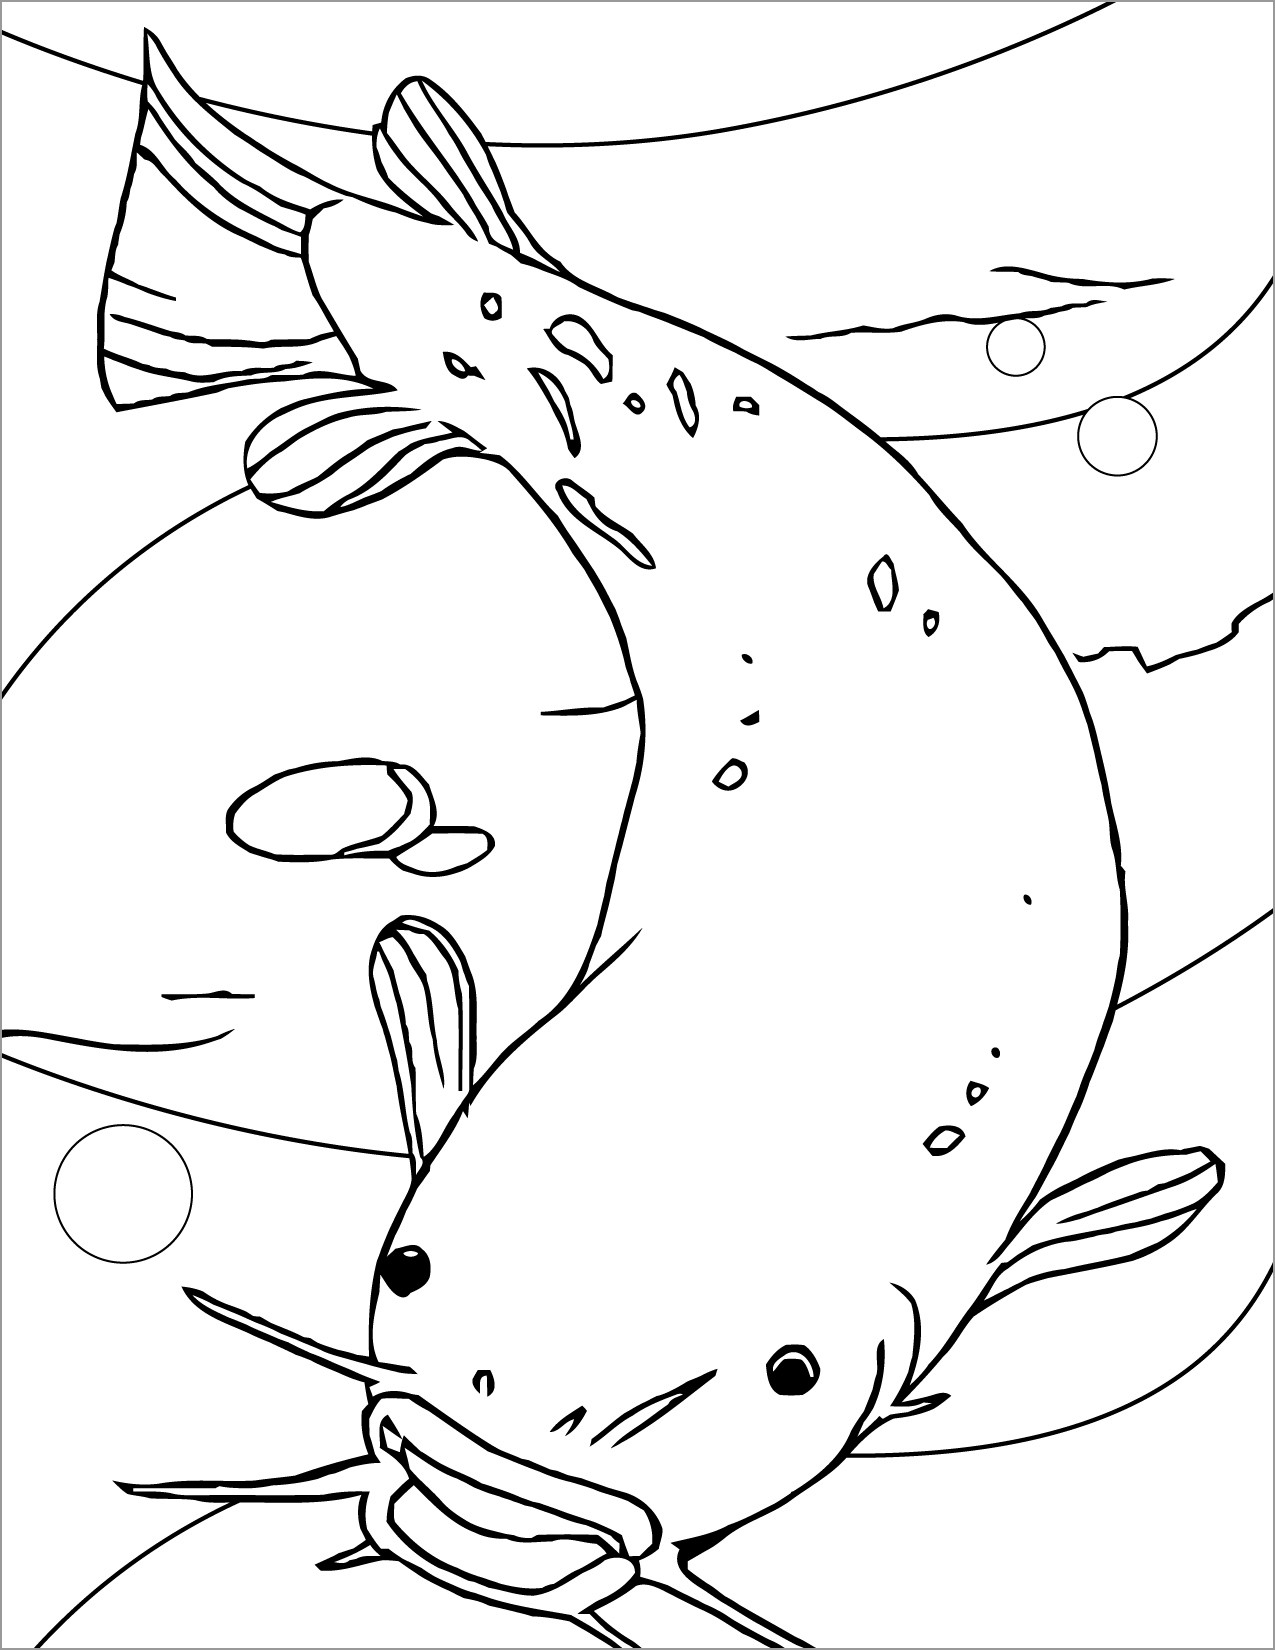 Catfish Coloring Pages - ColoringBay